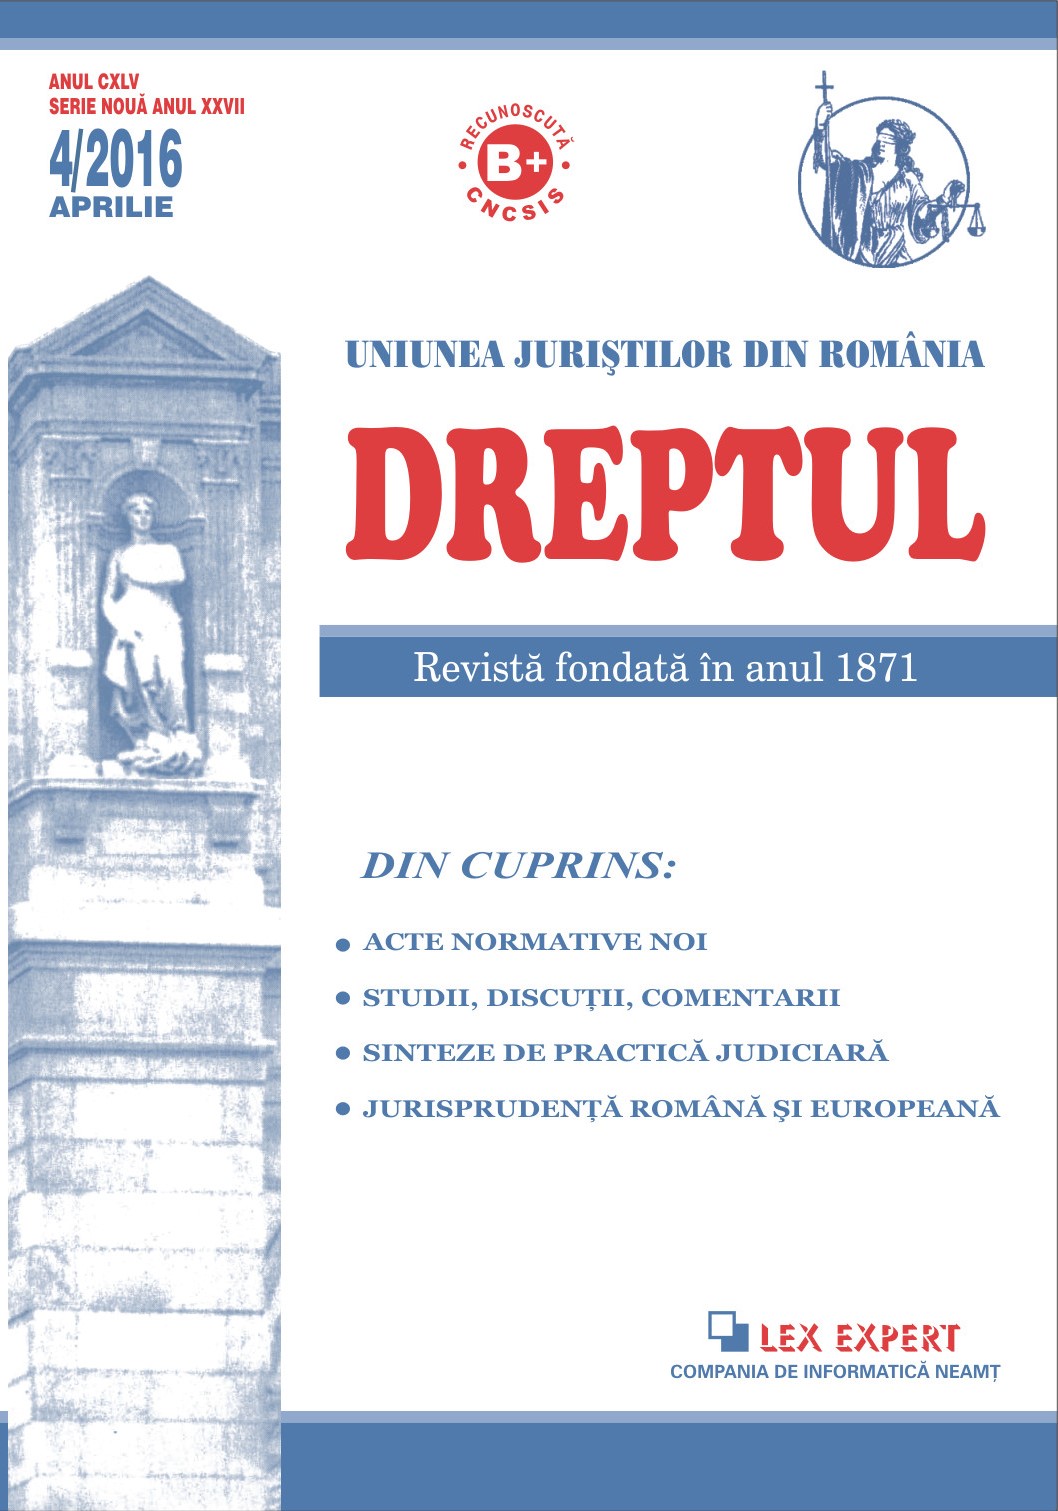 Critical remarks on the transposition into the Romanian legislation concerning the subsidized medicines of Directive 89/105/EEC of 21 December 1988 Cover Image